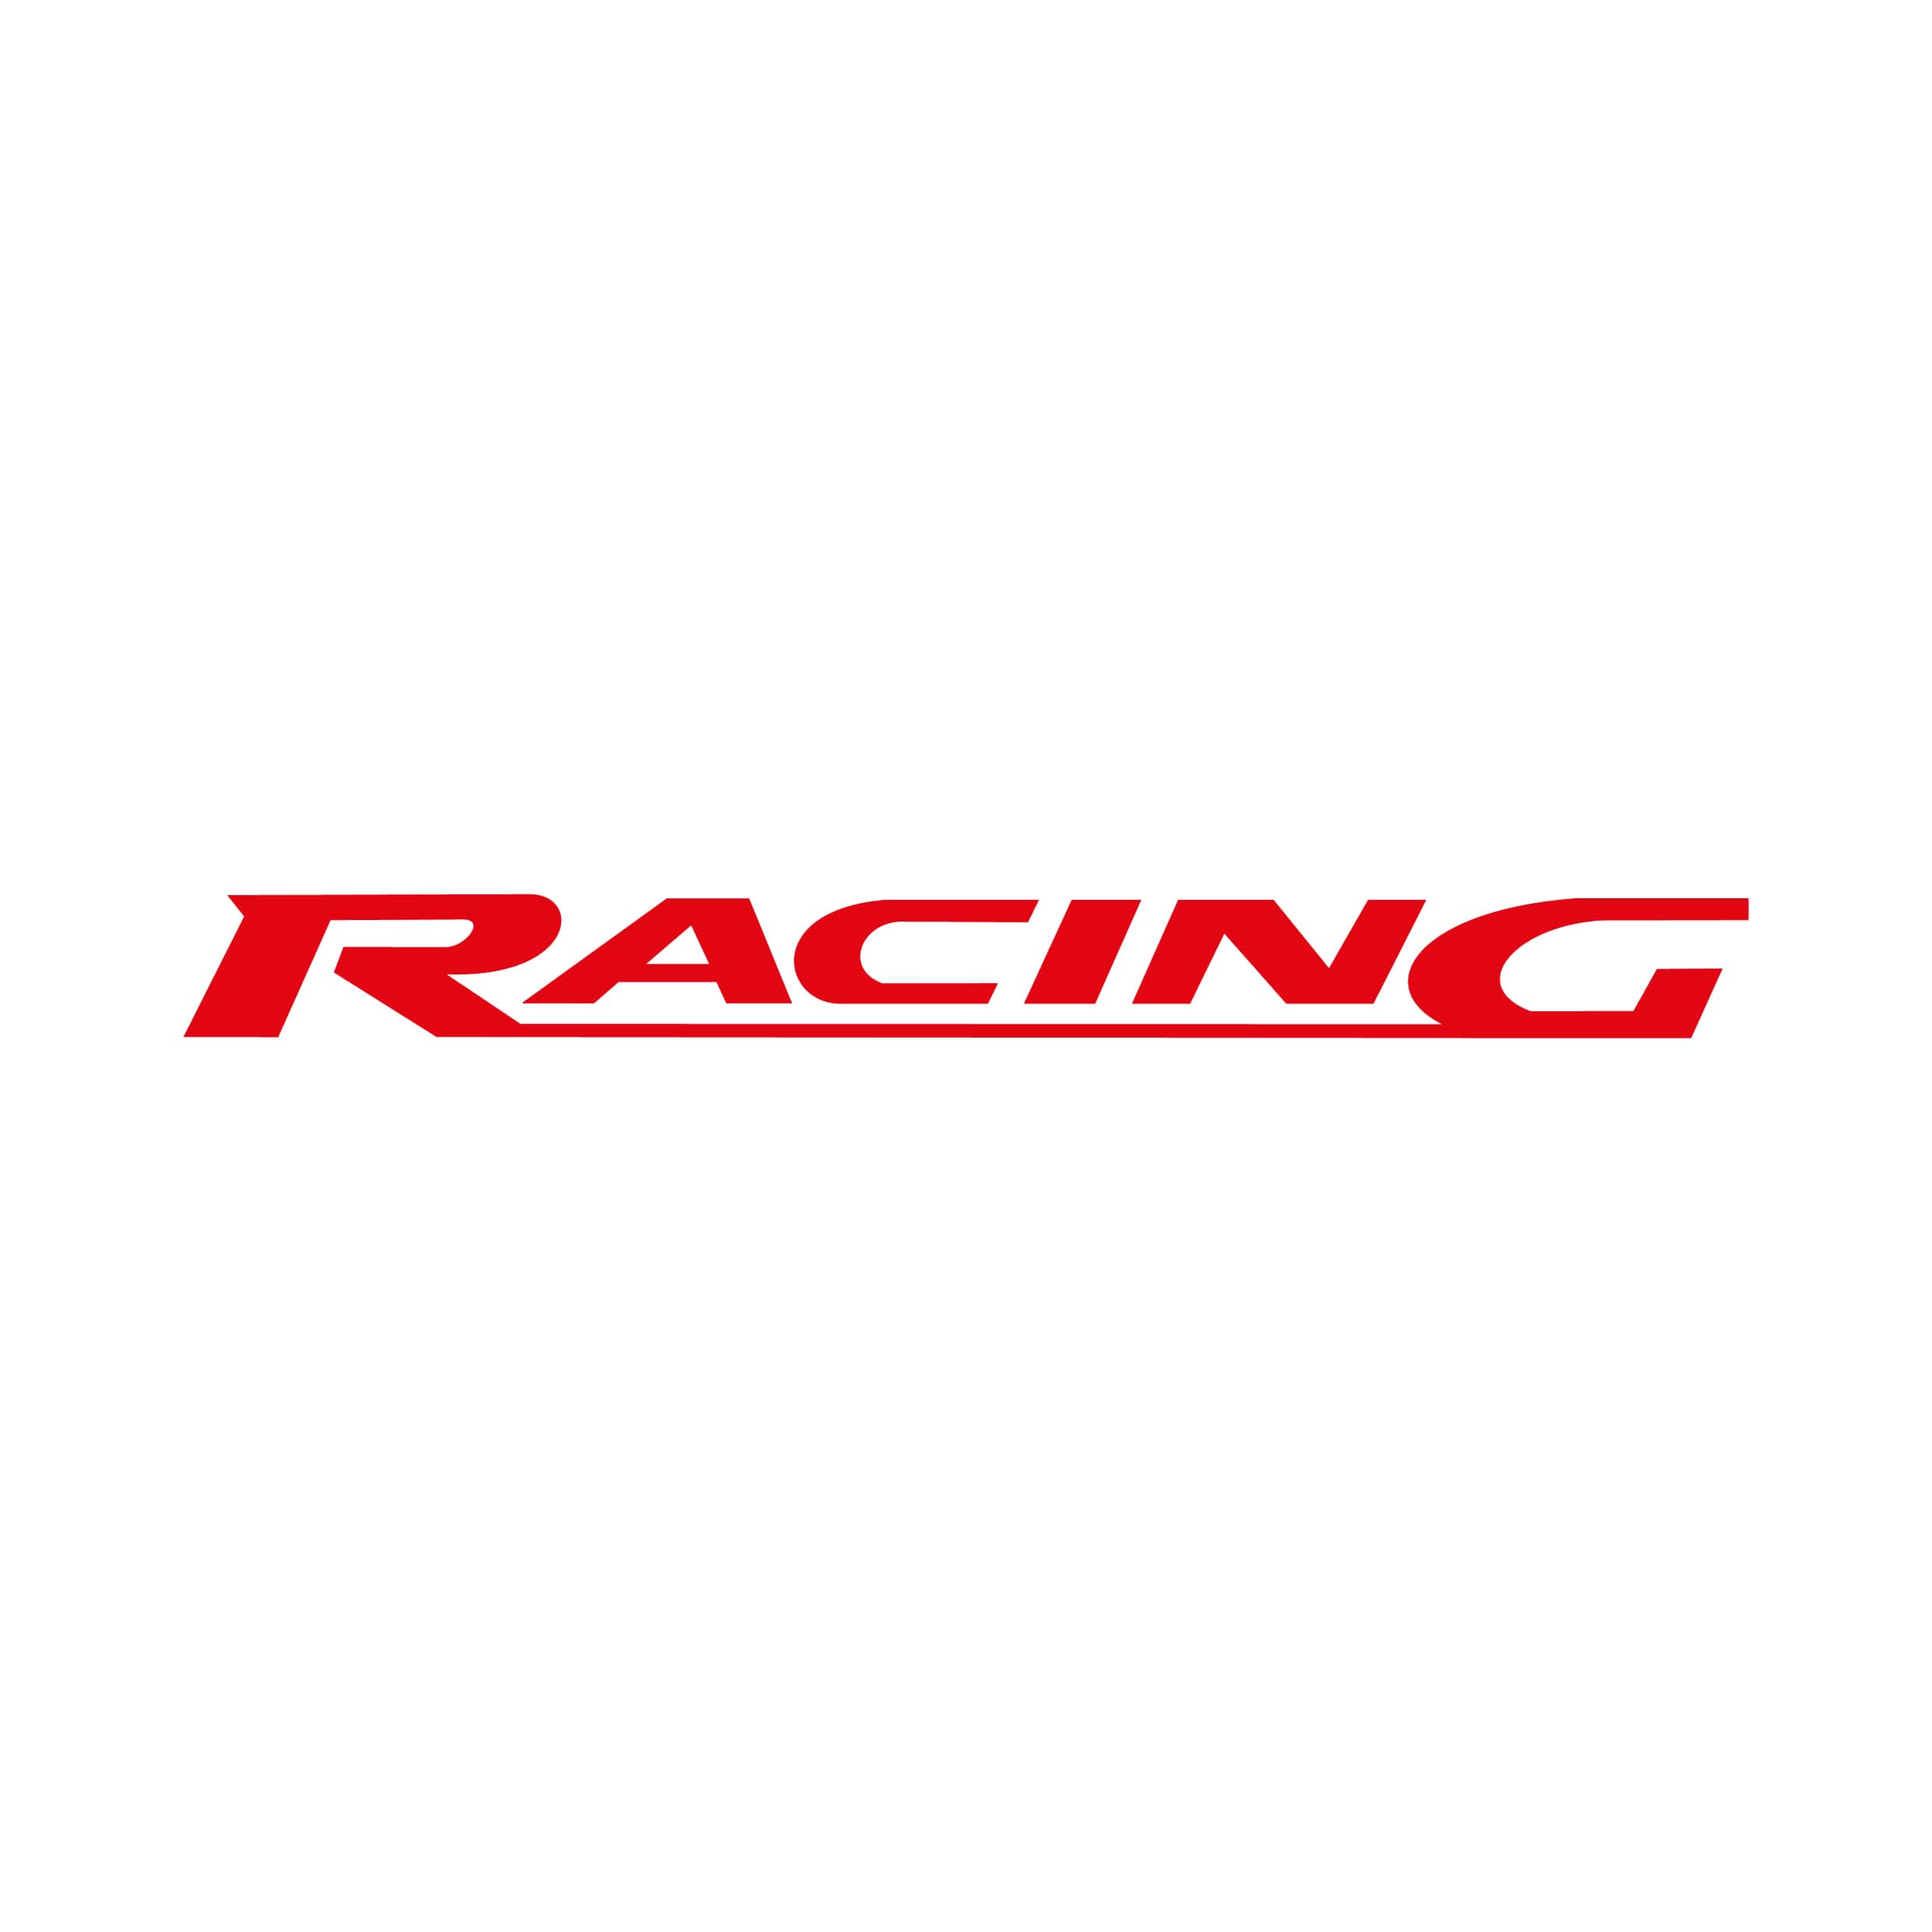 stickers-ford-racing-ref3-autocollant-voiture-sticker-auto-autocollants-decals-sponsors-racing-tuning-sport-logo-min